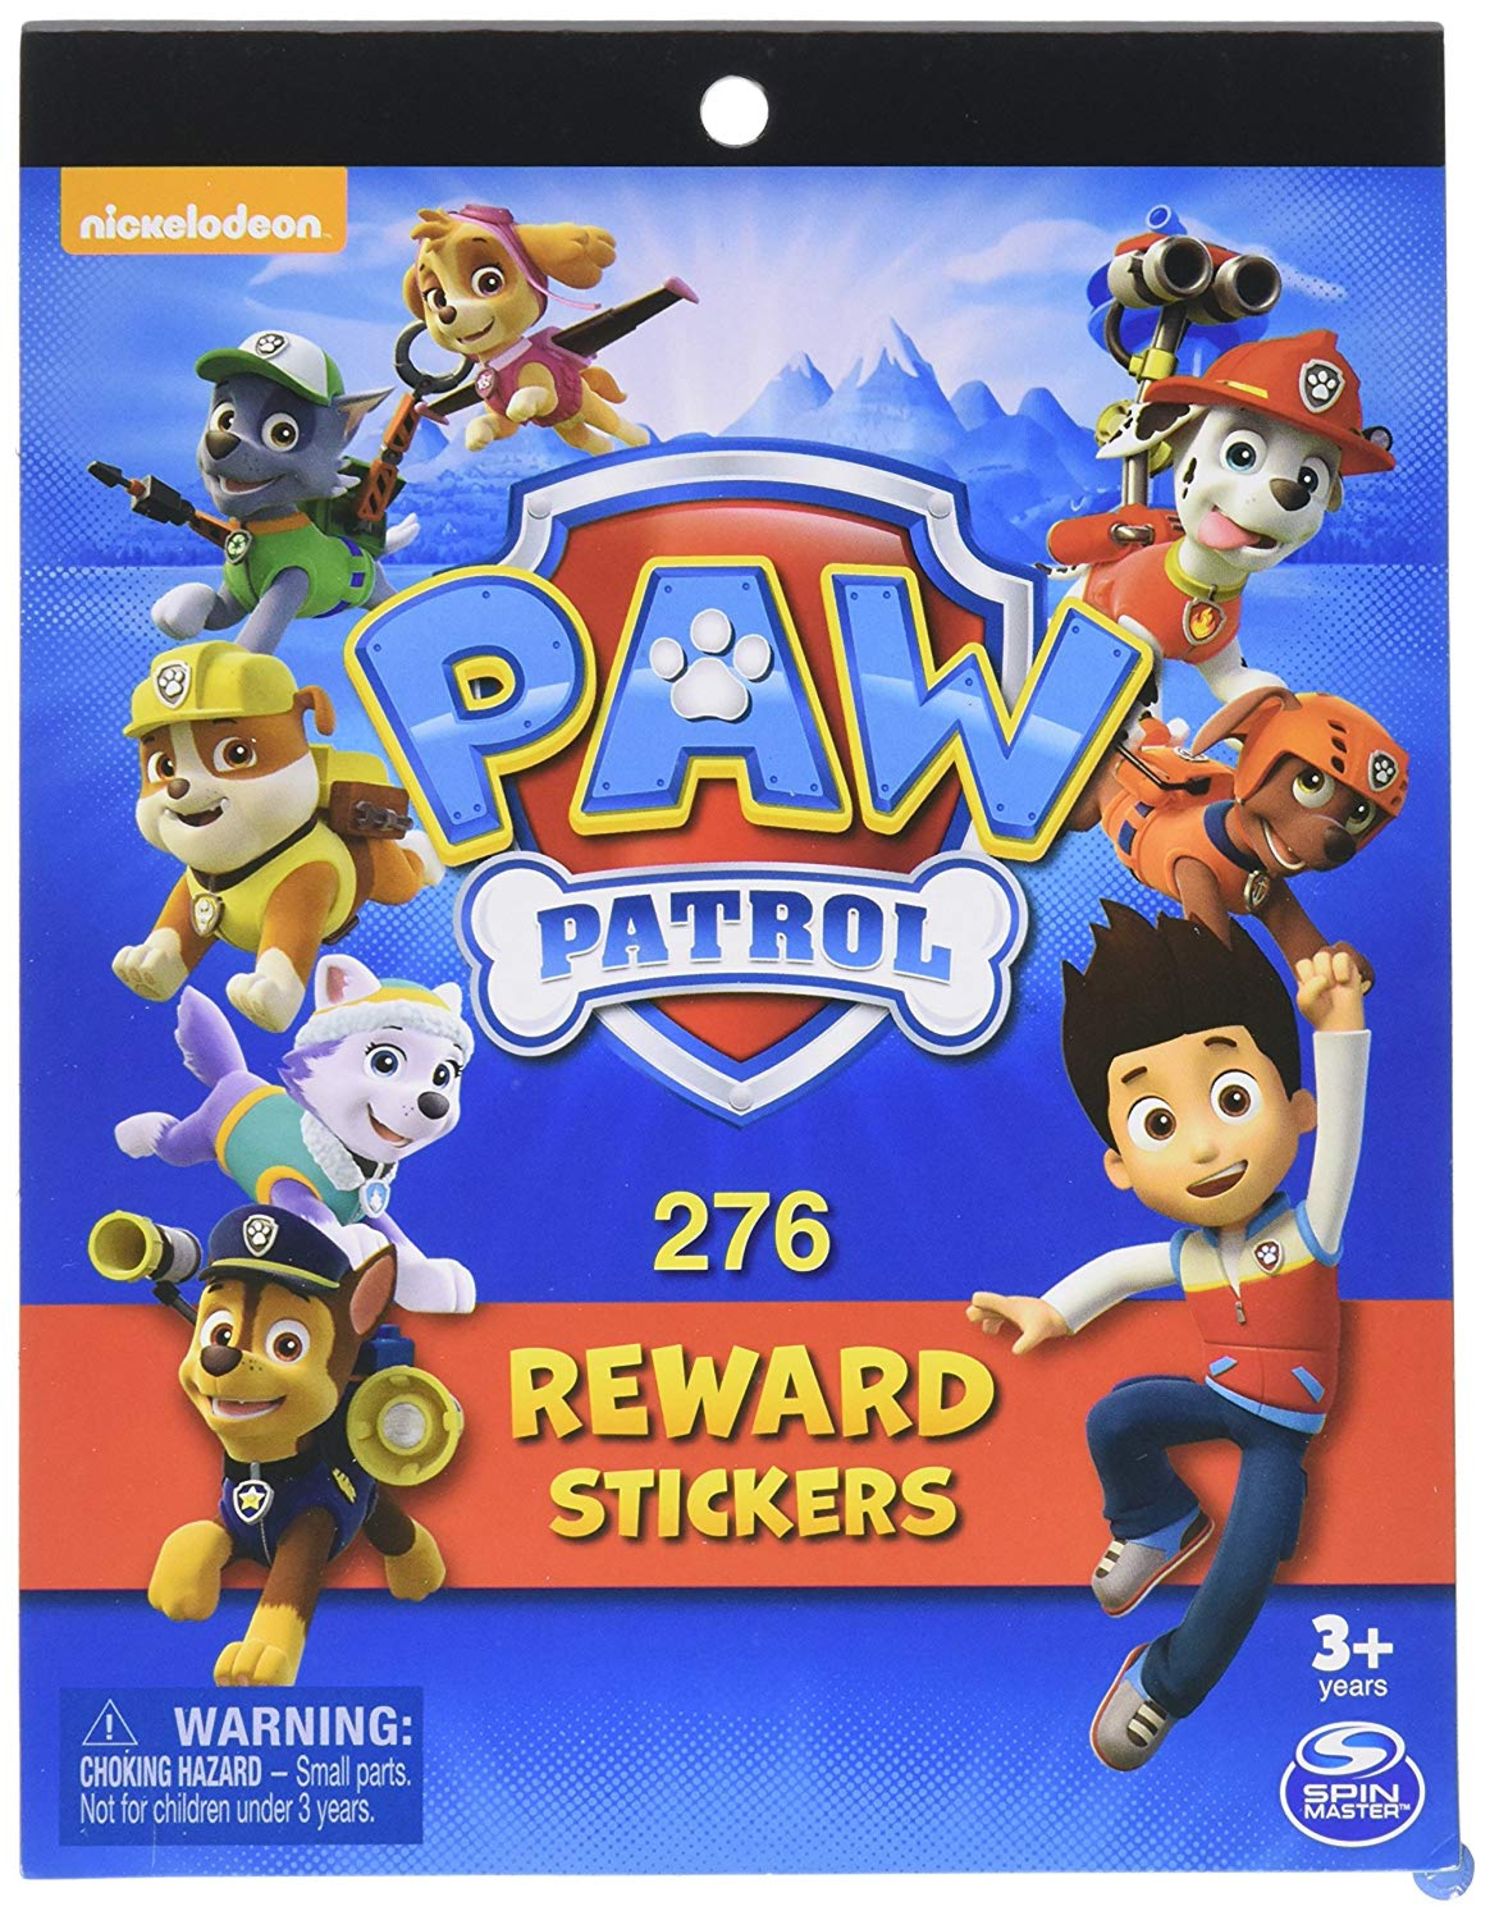 100 packs of Paw Patrol stickers by Spinmaster